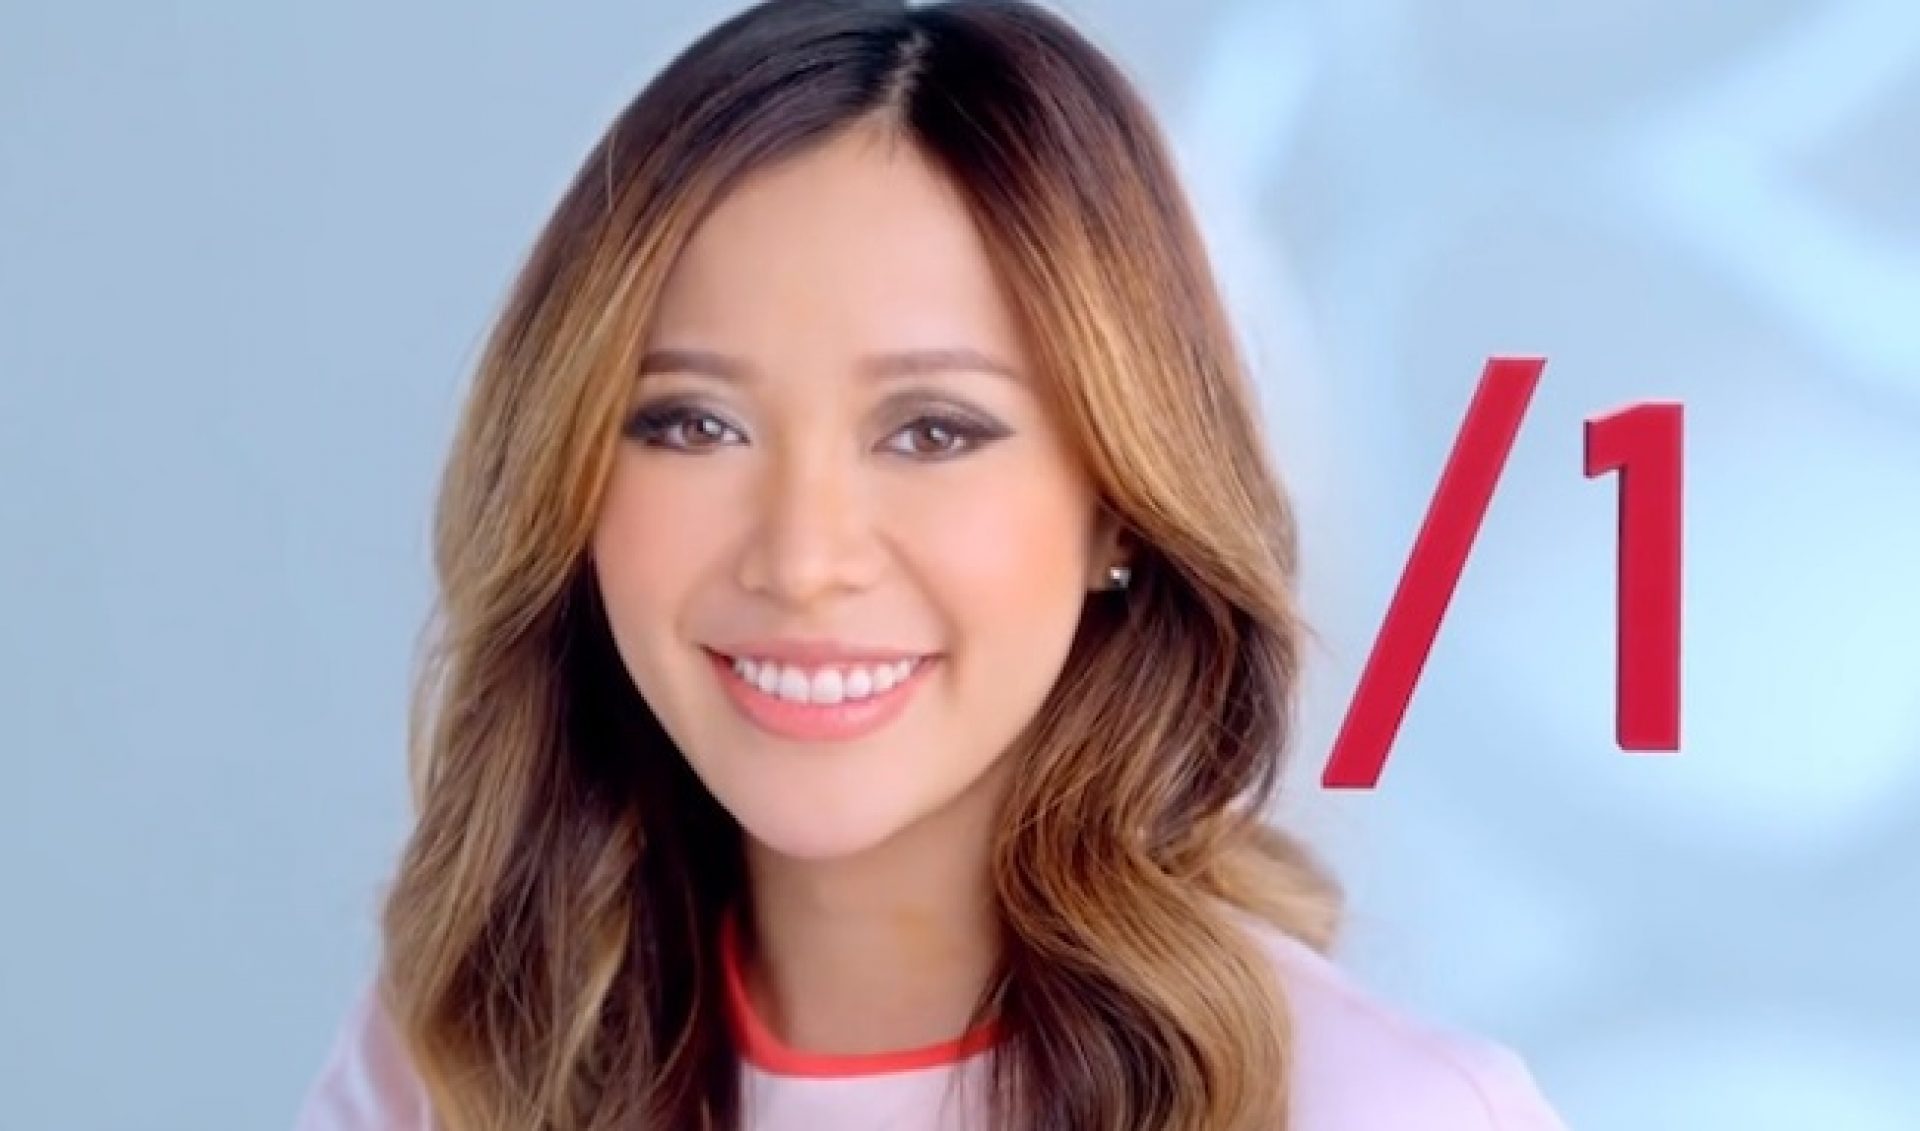 YouTube Sensation Michelle Phan Is One Of A Kind, Just Ask Dr. Pepper